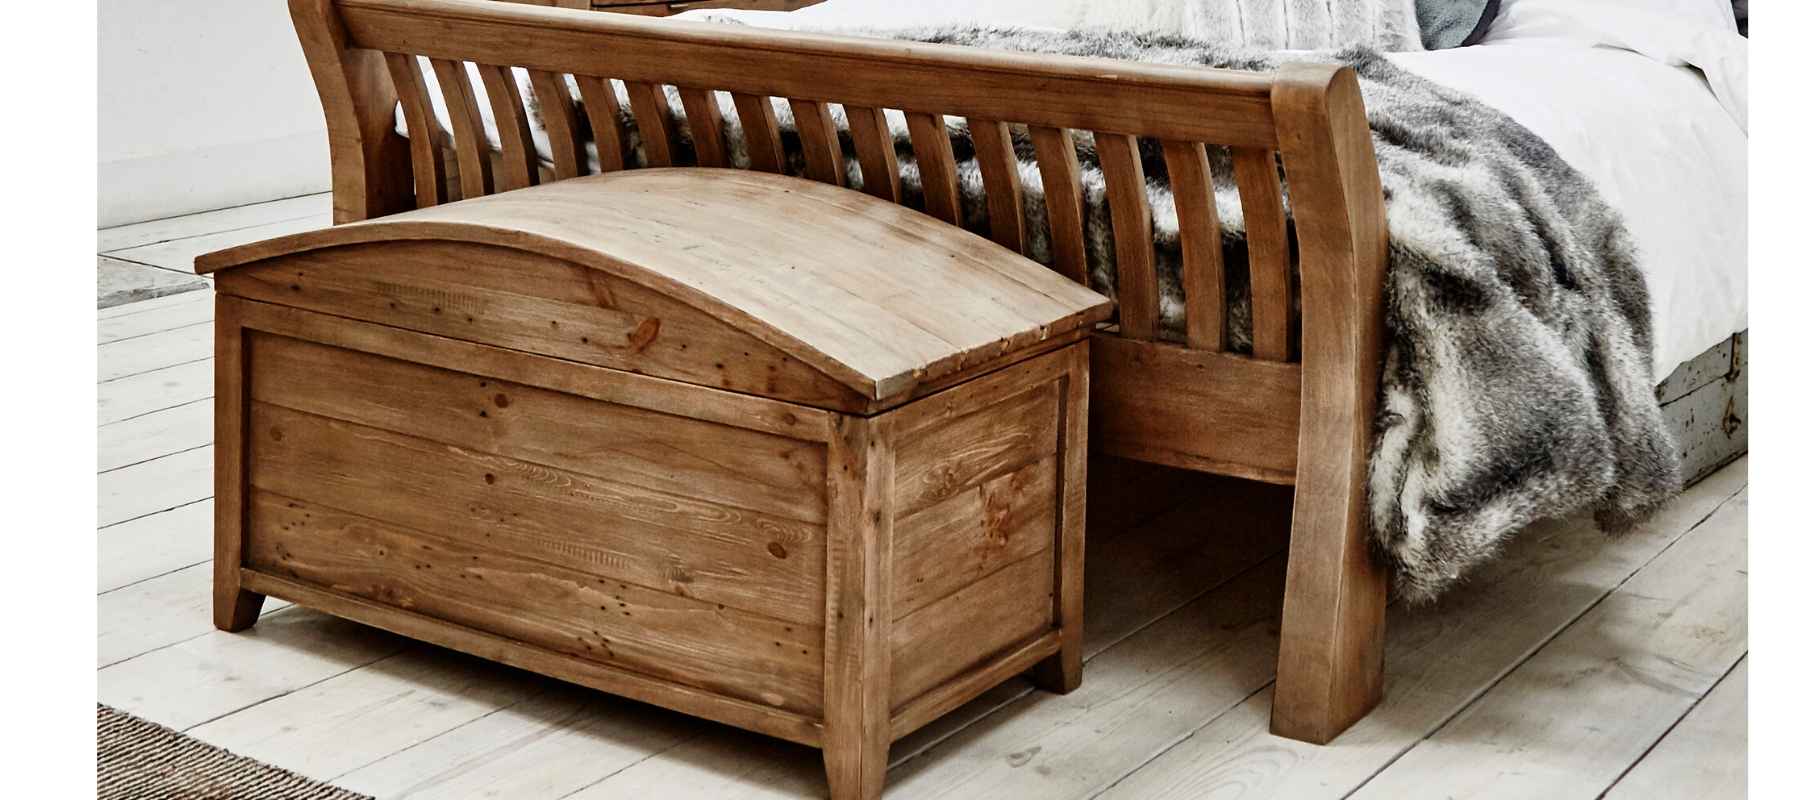 Wooden blanket chest in front of reclaimed wood bed